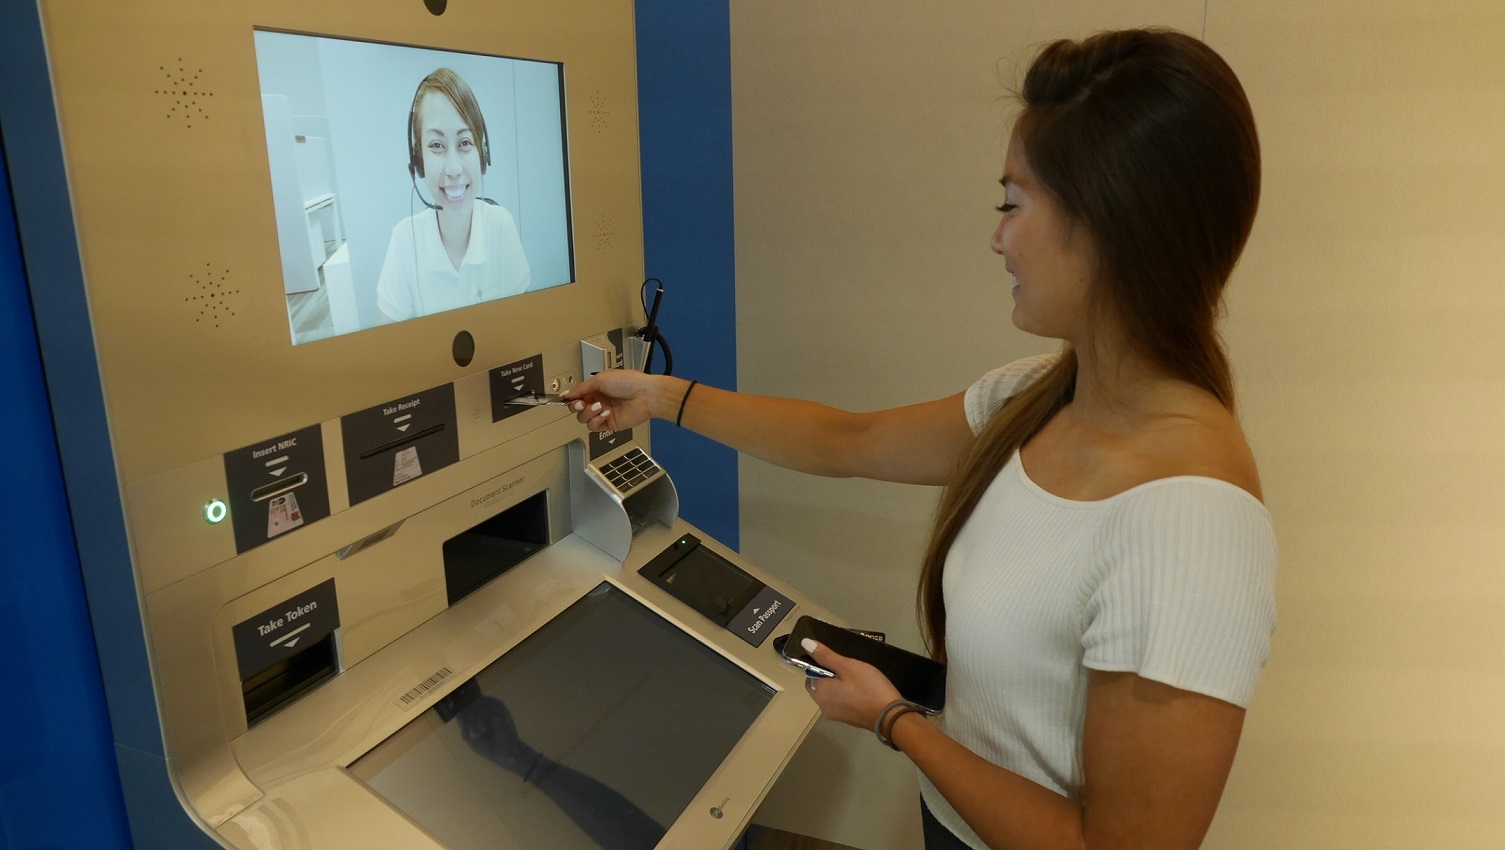 DBS/POSB launches Singapore’s first video teller machines across nine locations